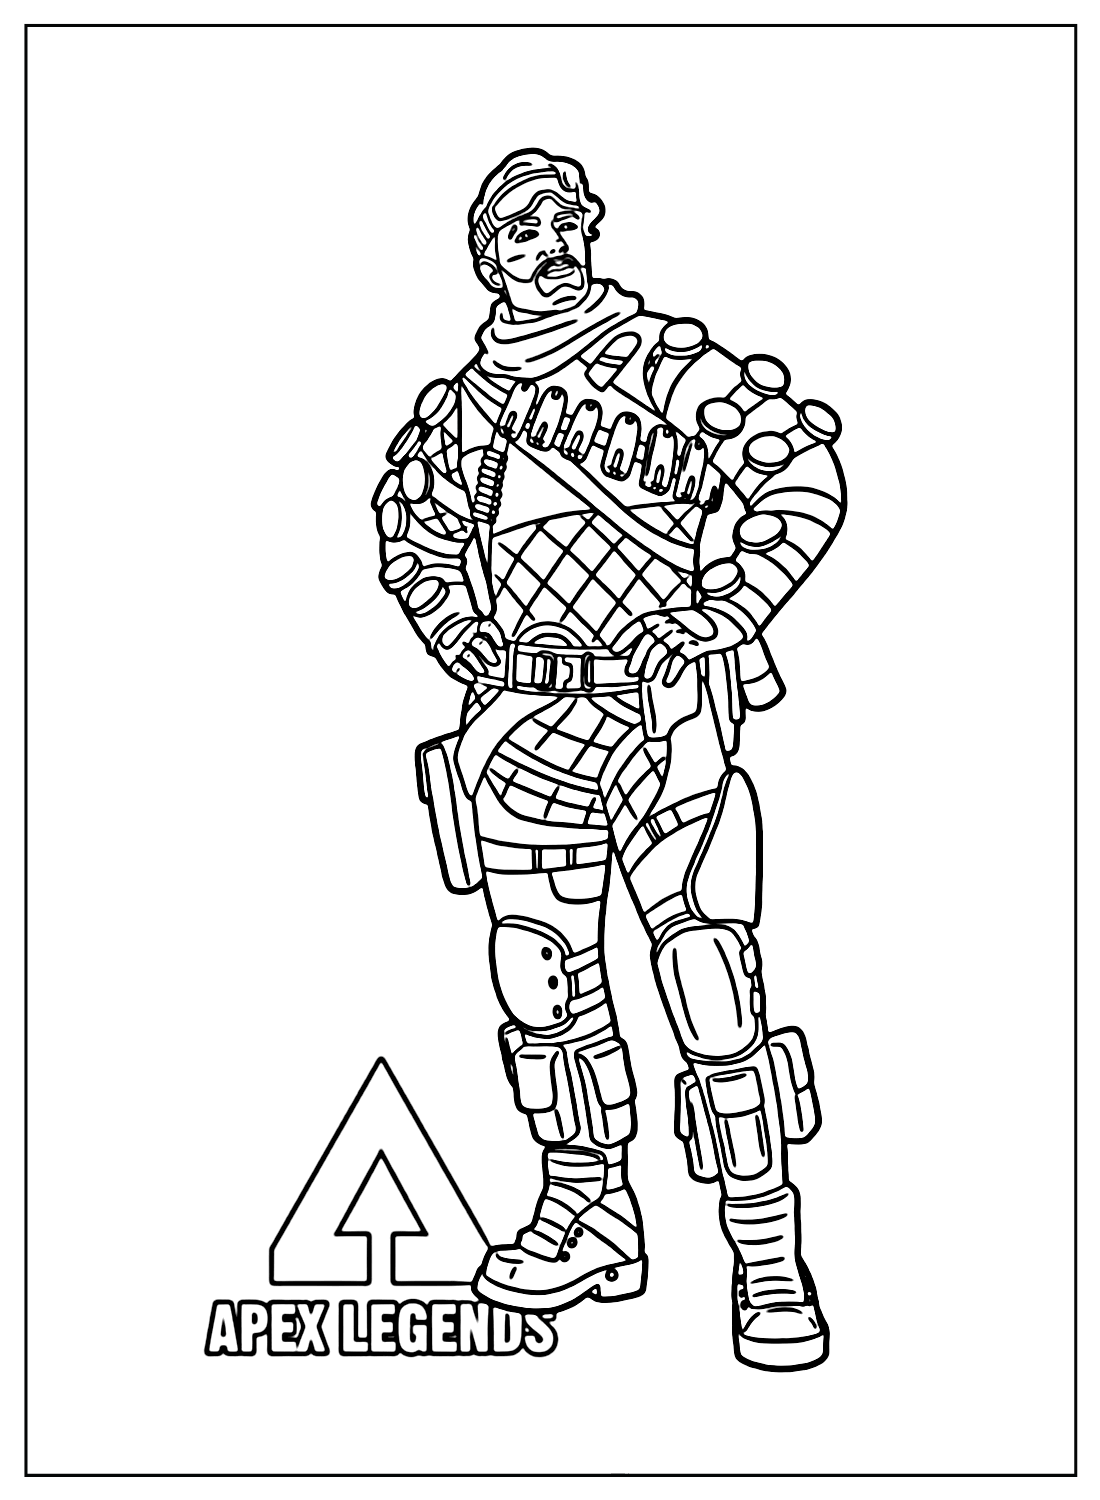 Mirage Apex Legends Coloring Sheets from Apex Legends